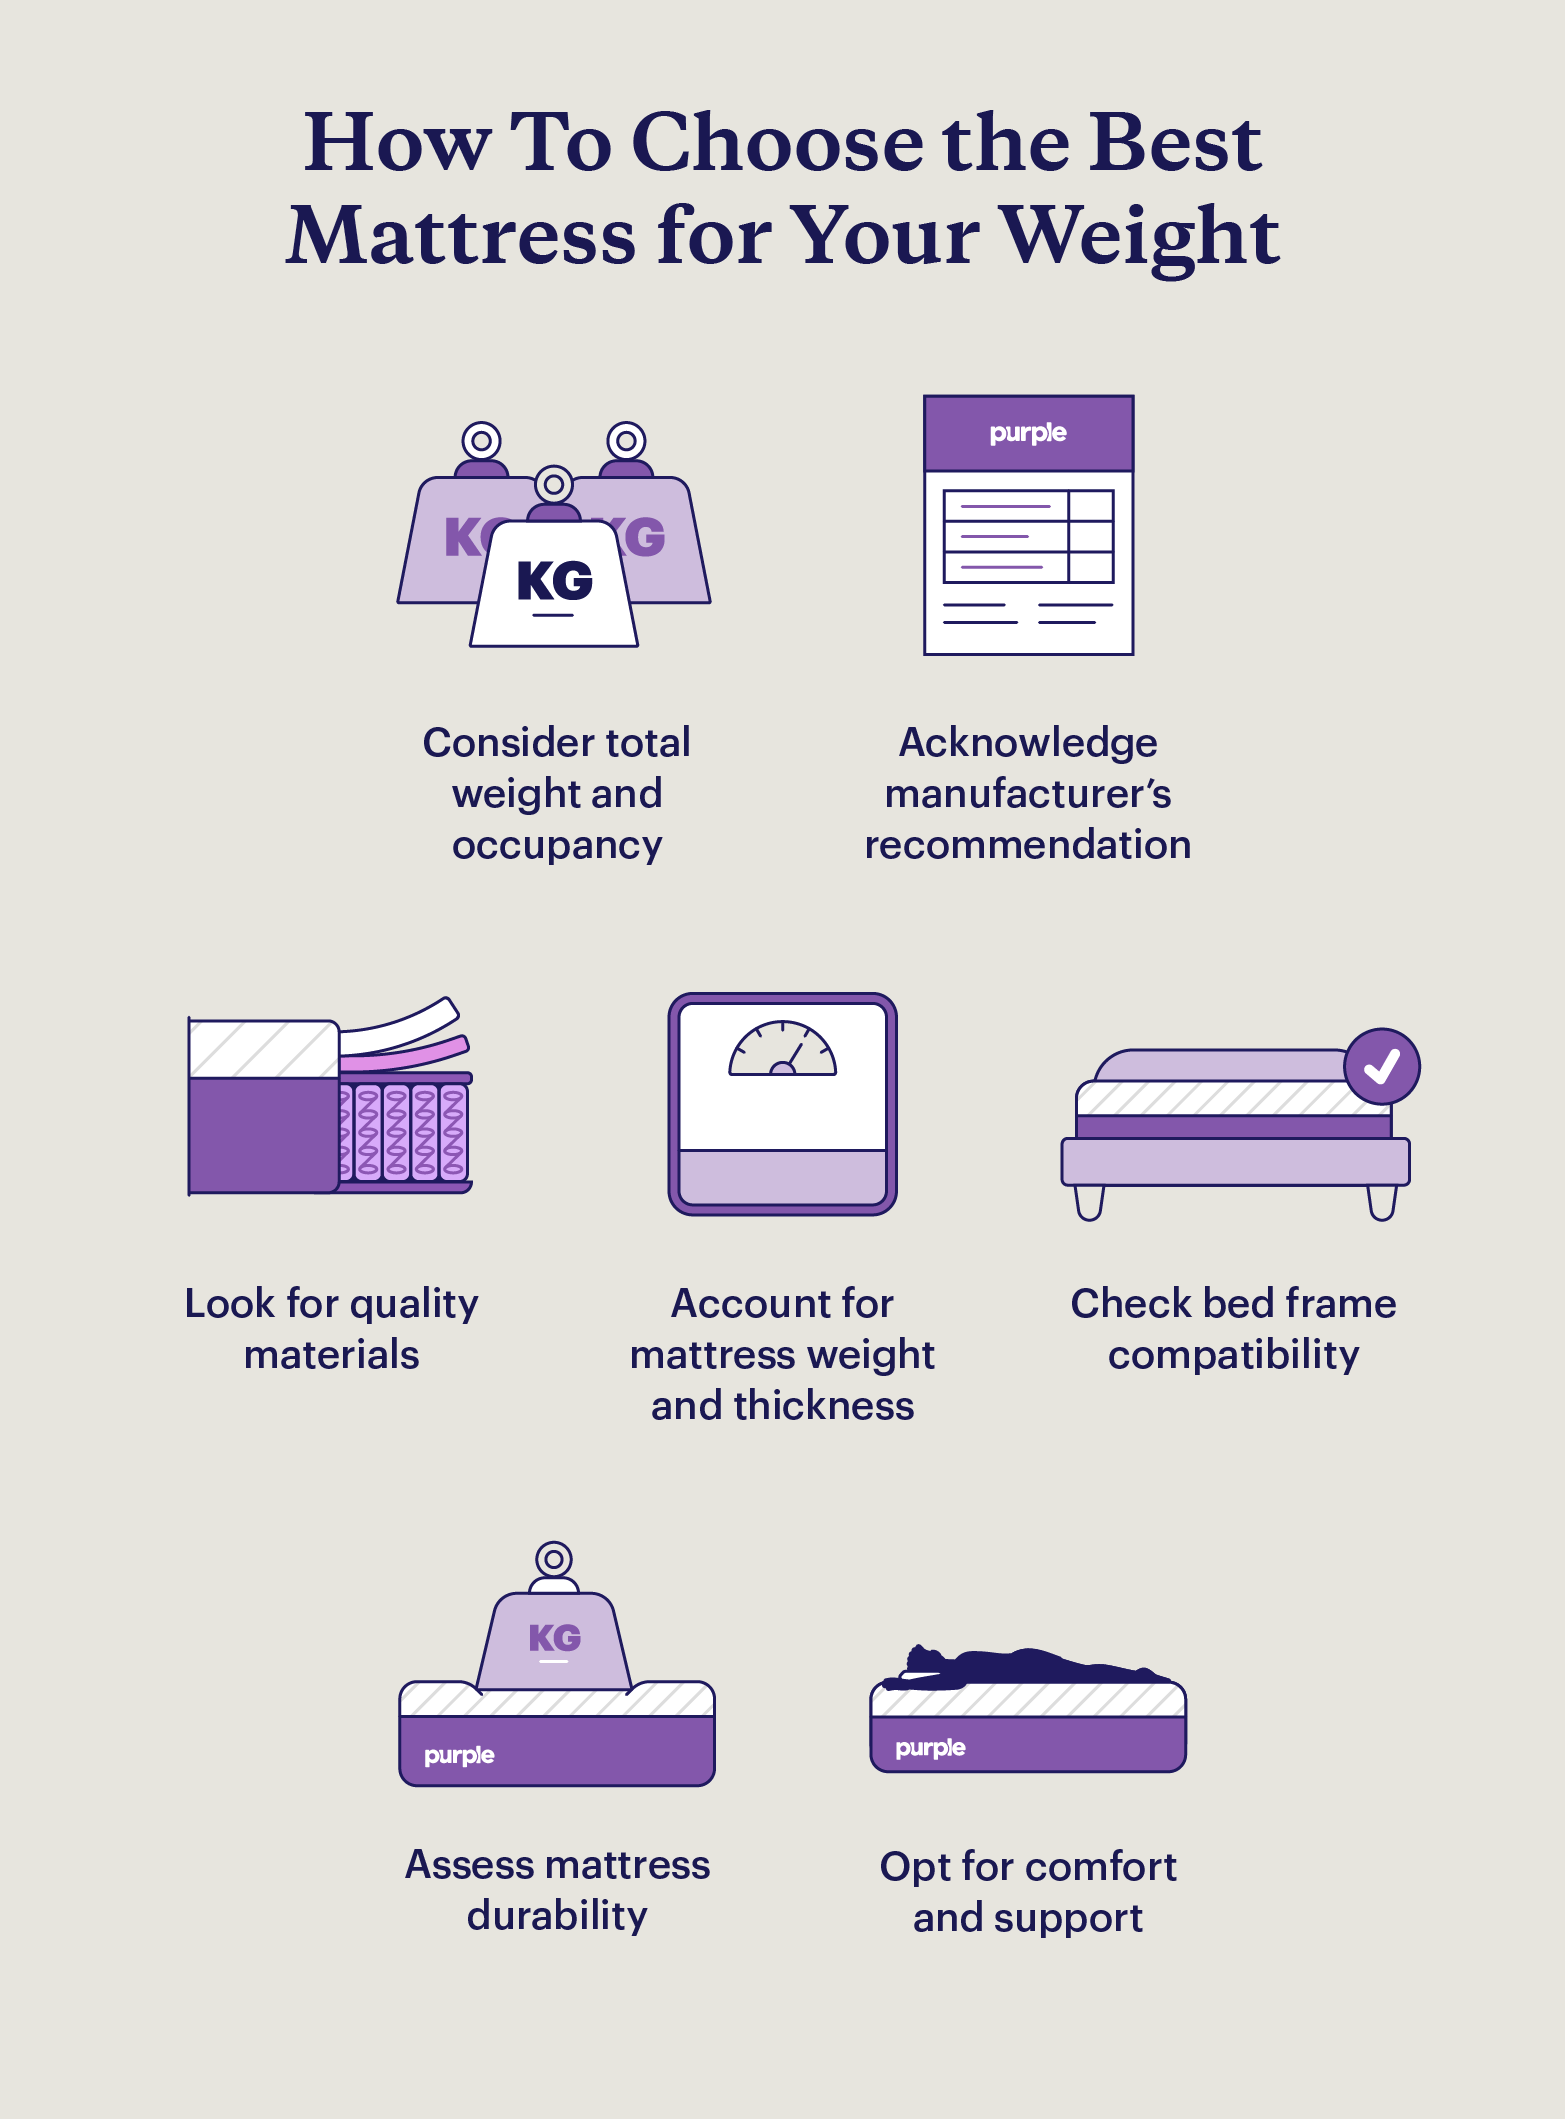 Graphic describing 7 considerations for choosing a mattress that best supports your weight.